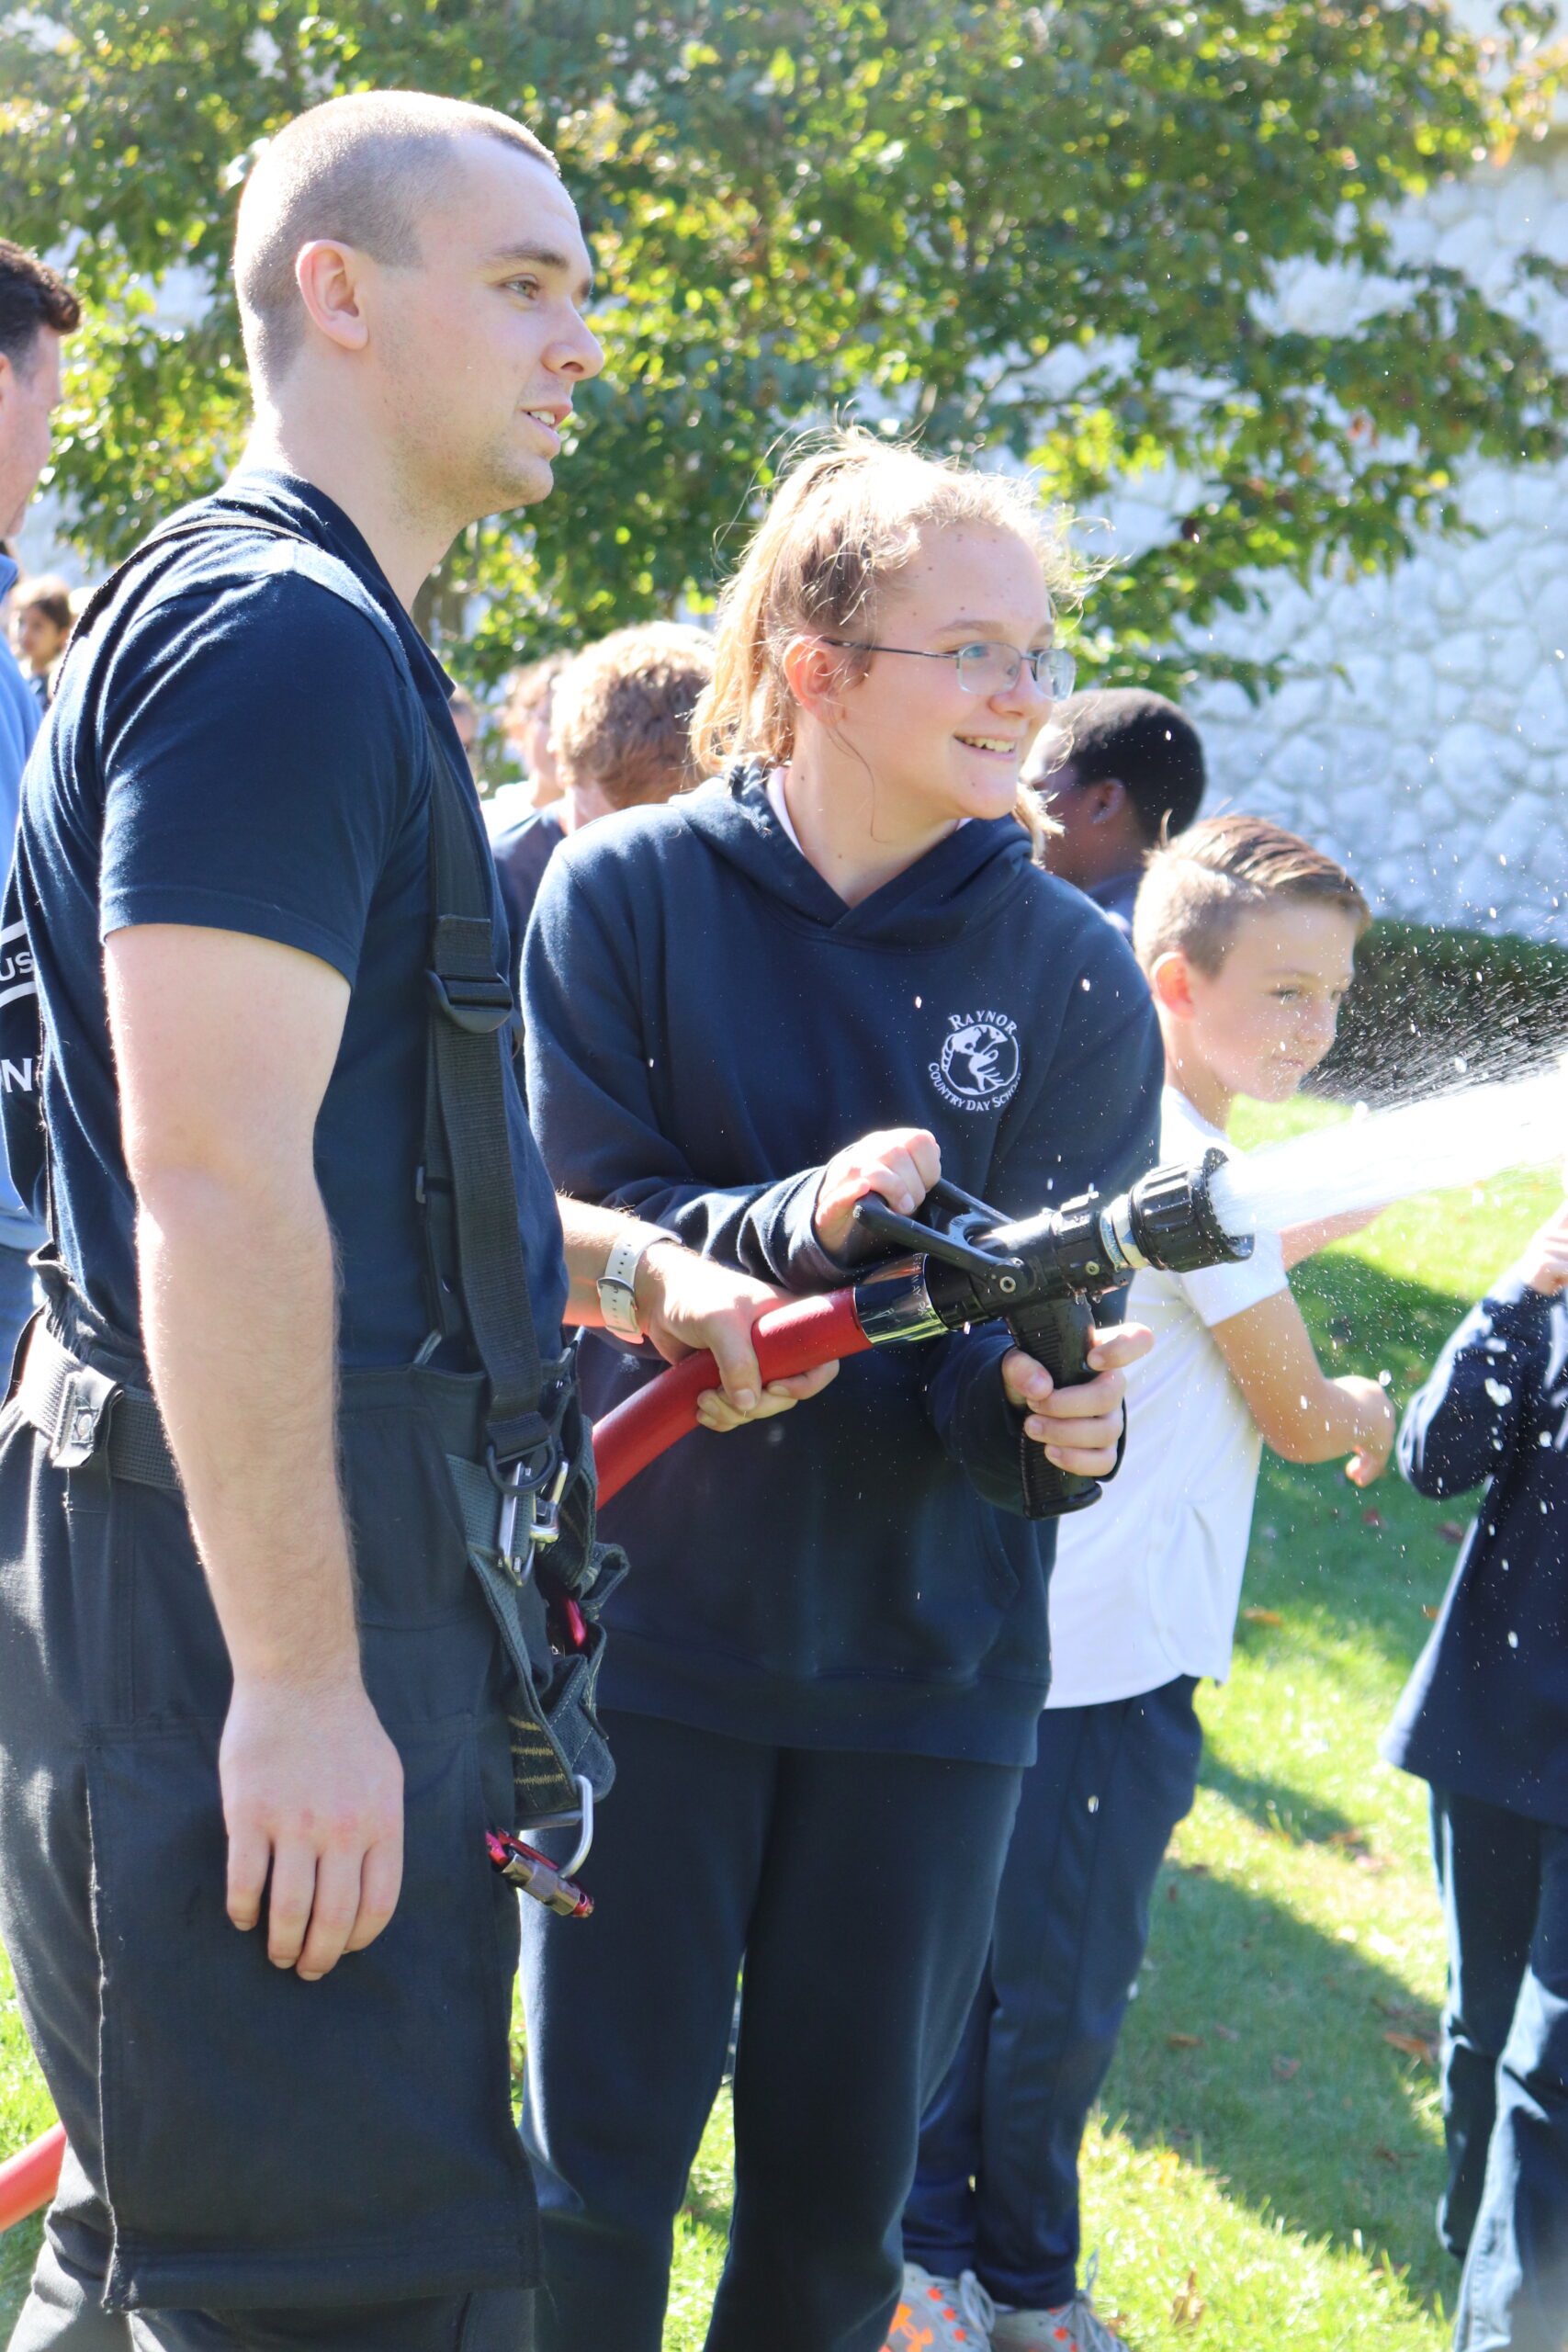 The Eastport Fire Department visited Raynor Country Day School on October 22 to talk about fire safety and the new equipment the department has in its fleet.  Sixth-grader Emily Thullen takes a moment at the hose with the assistance of a volunteer firefighter.  COURTESY RAYNOR COUNTRY DAY SCHOOL